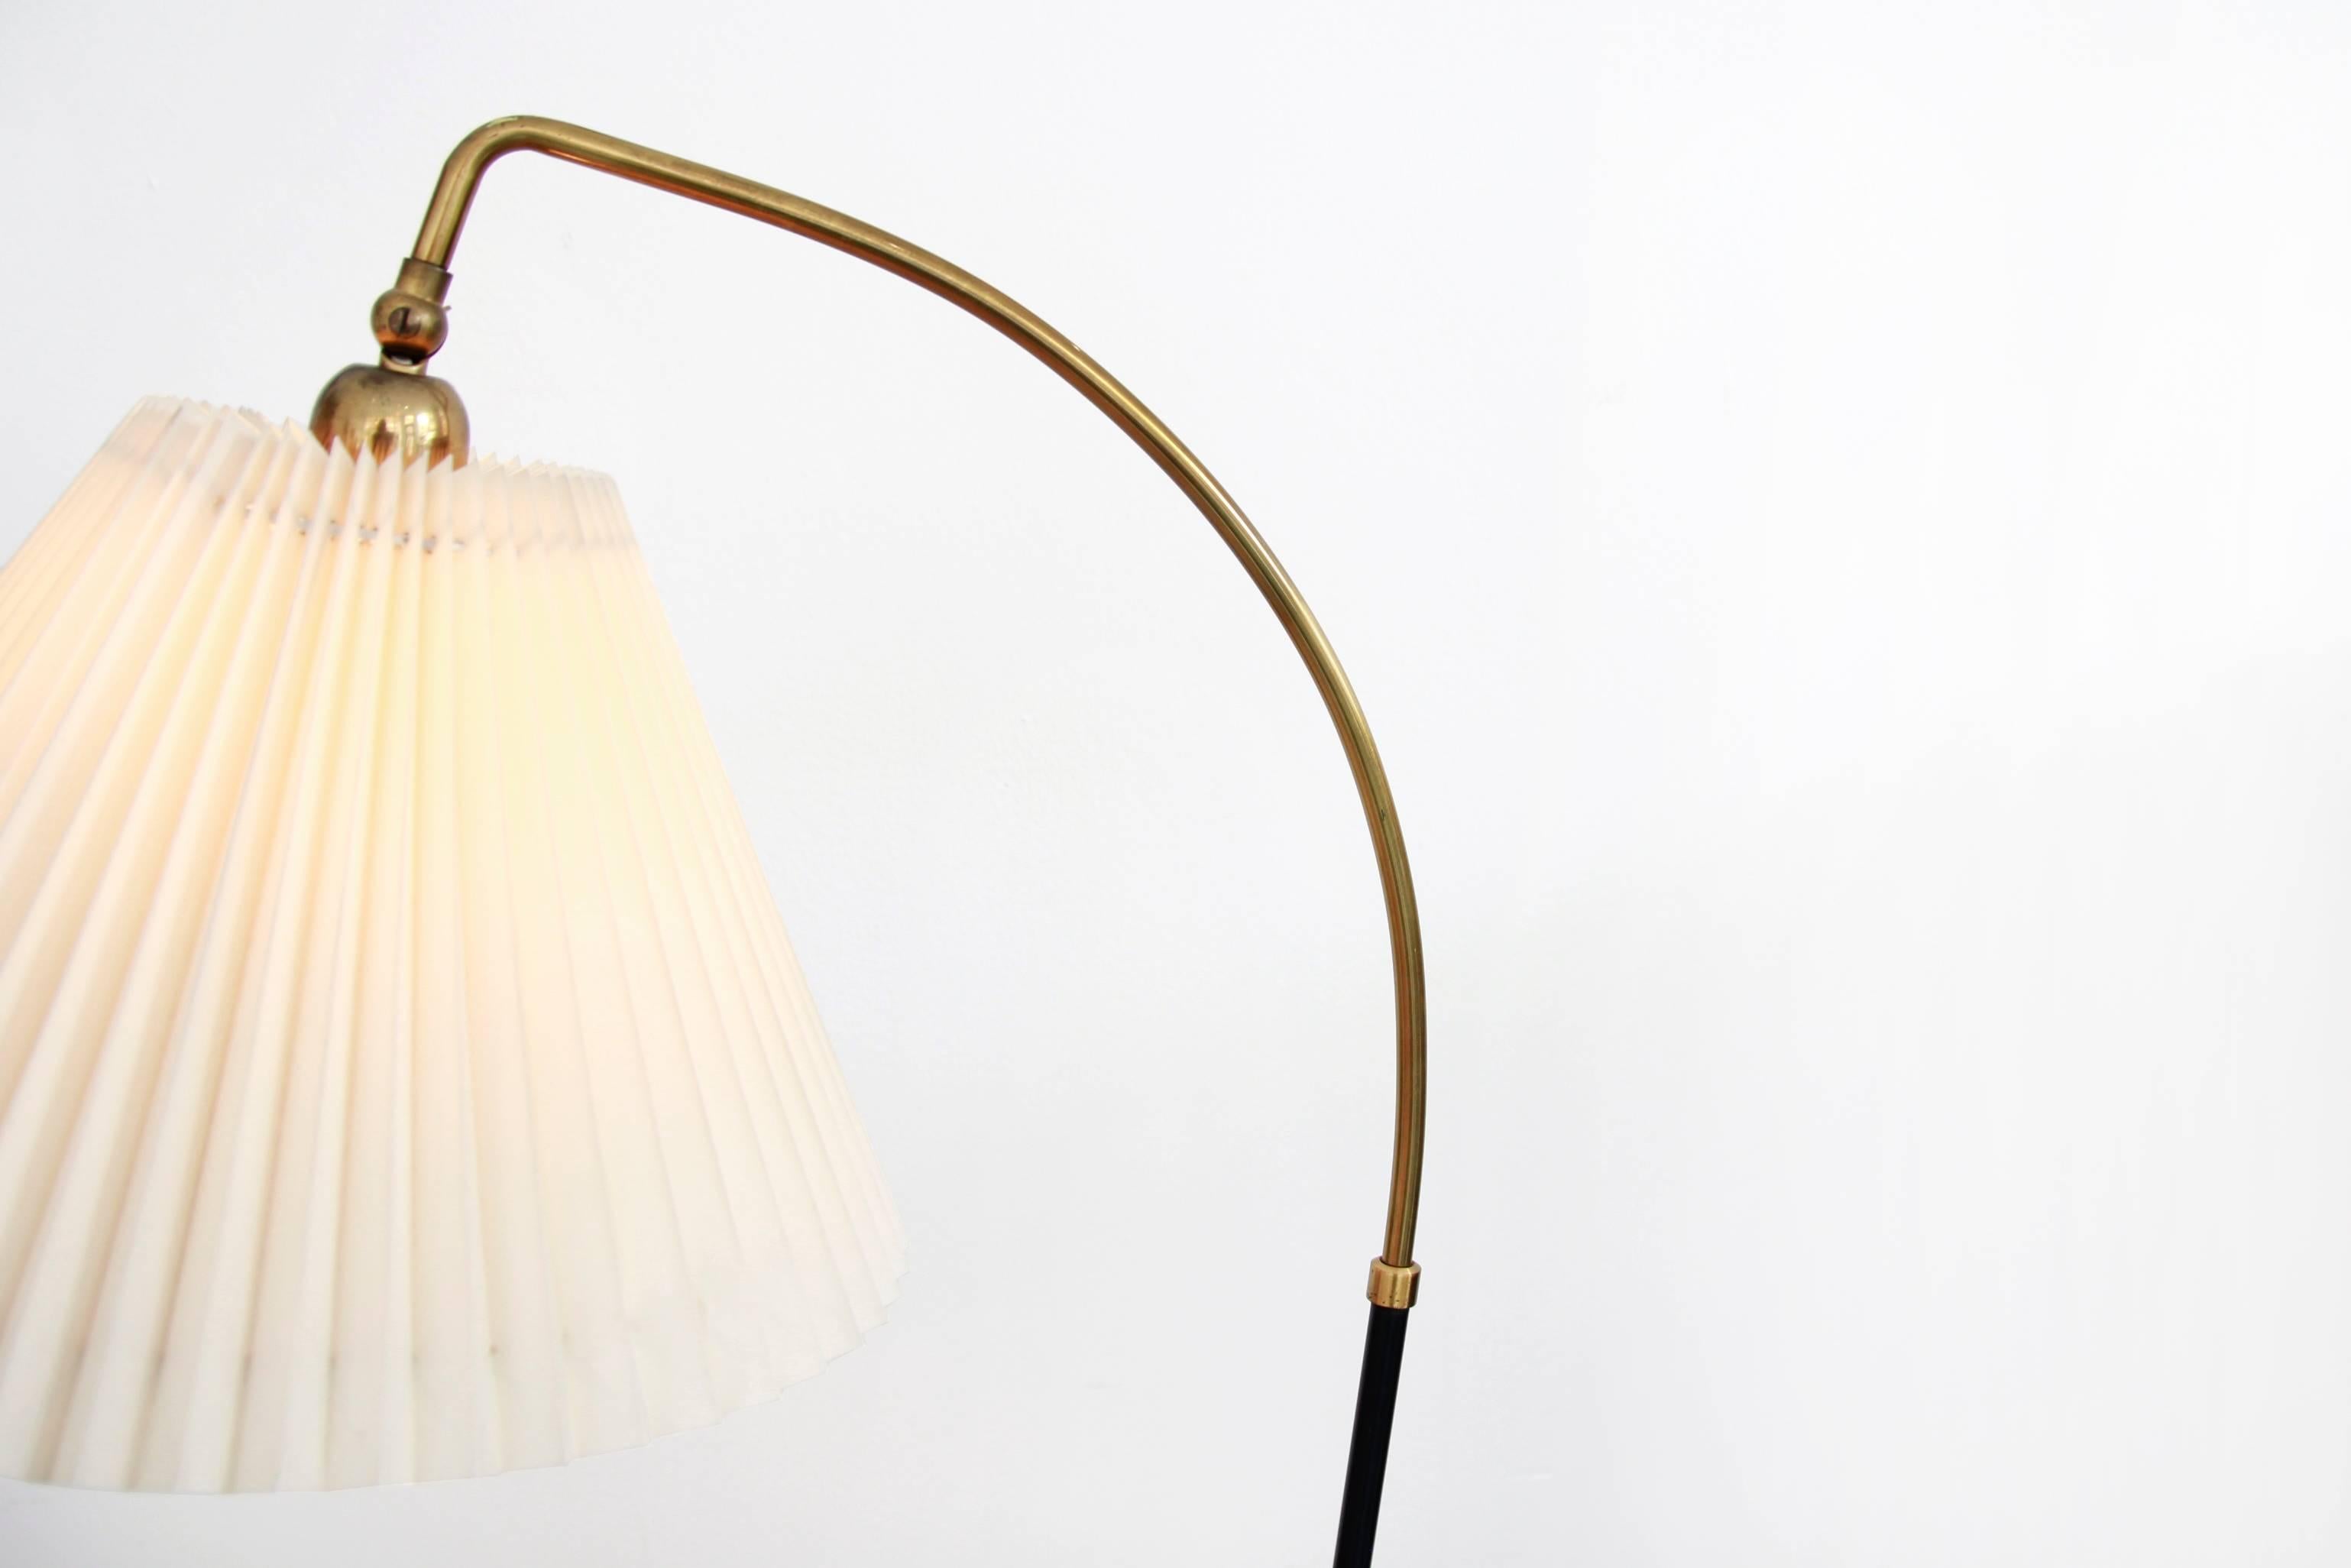 Danish Rare Svend Aage Holm Sørensen Design Standing Lamp with Le Klint Shade For Sale